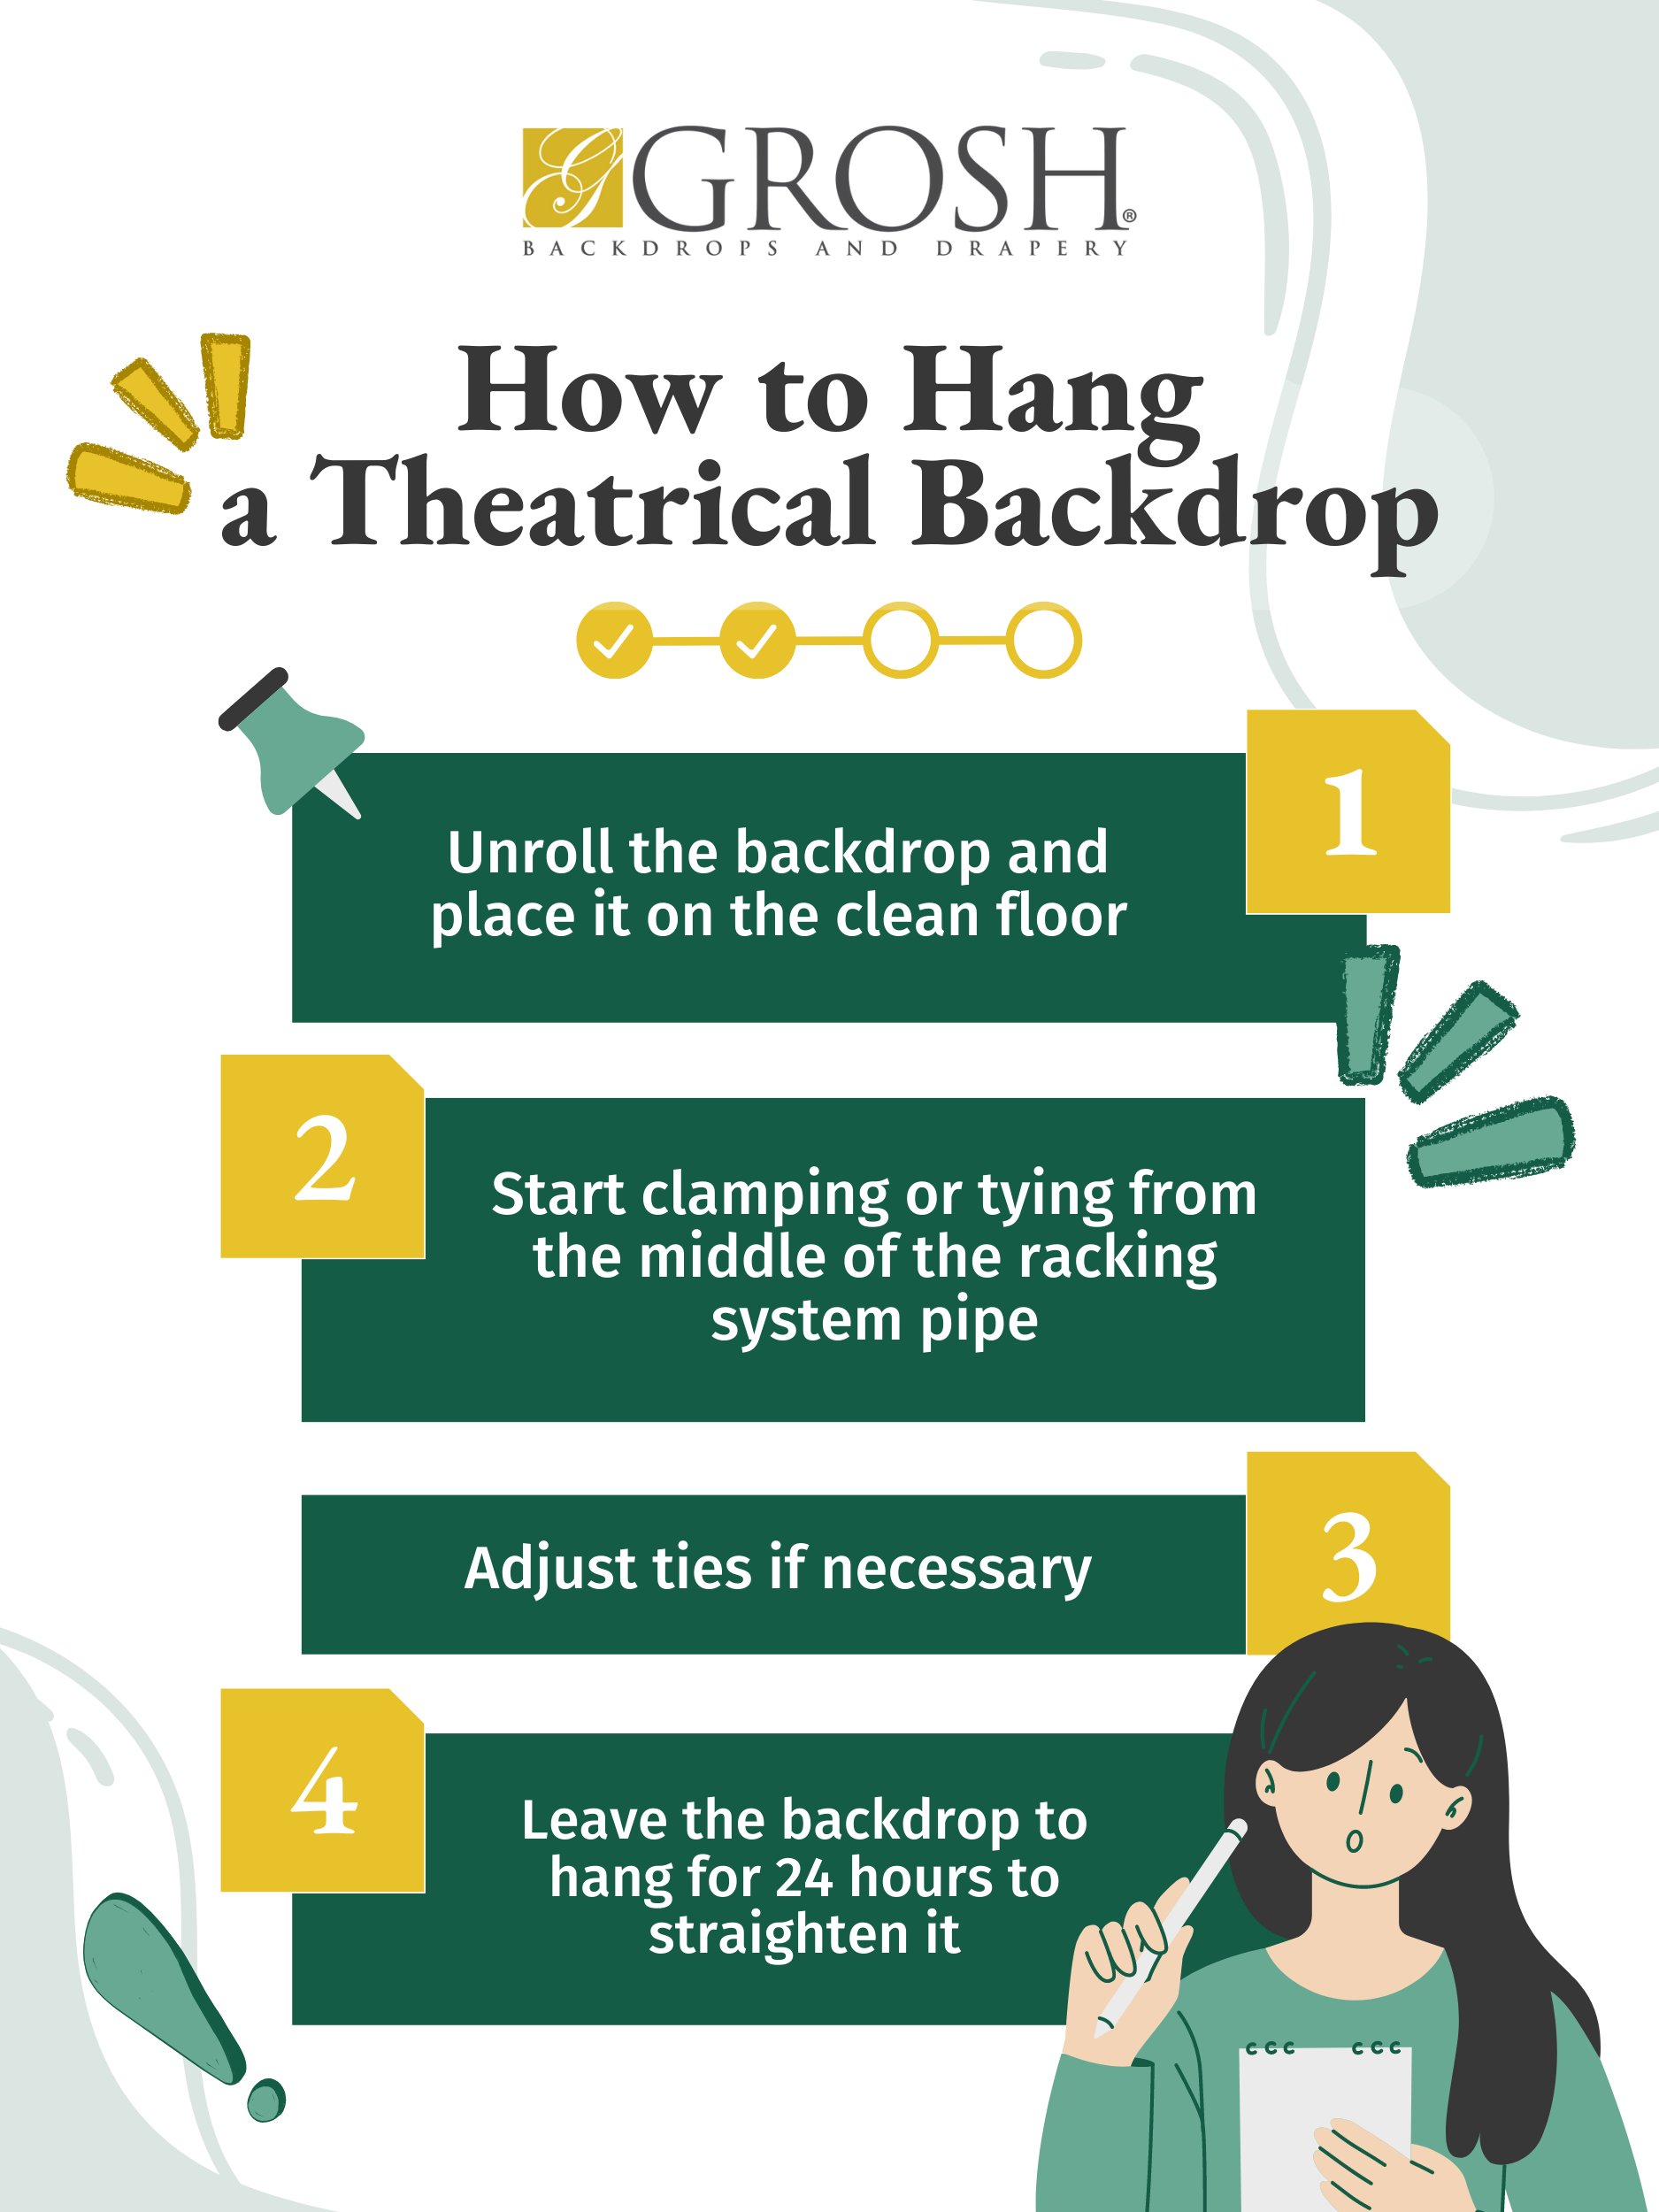 Hang Theatrical Backdrop Infographic 